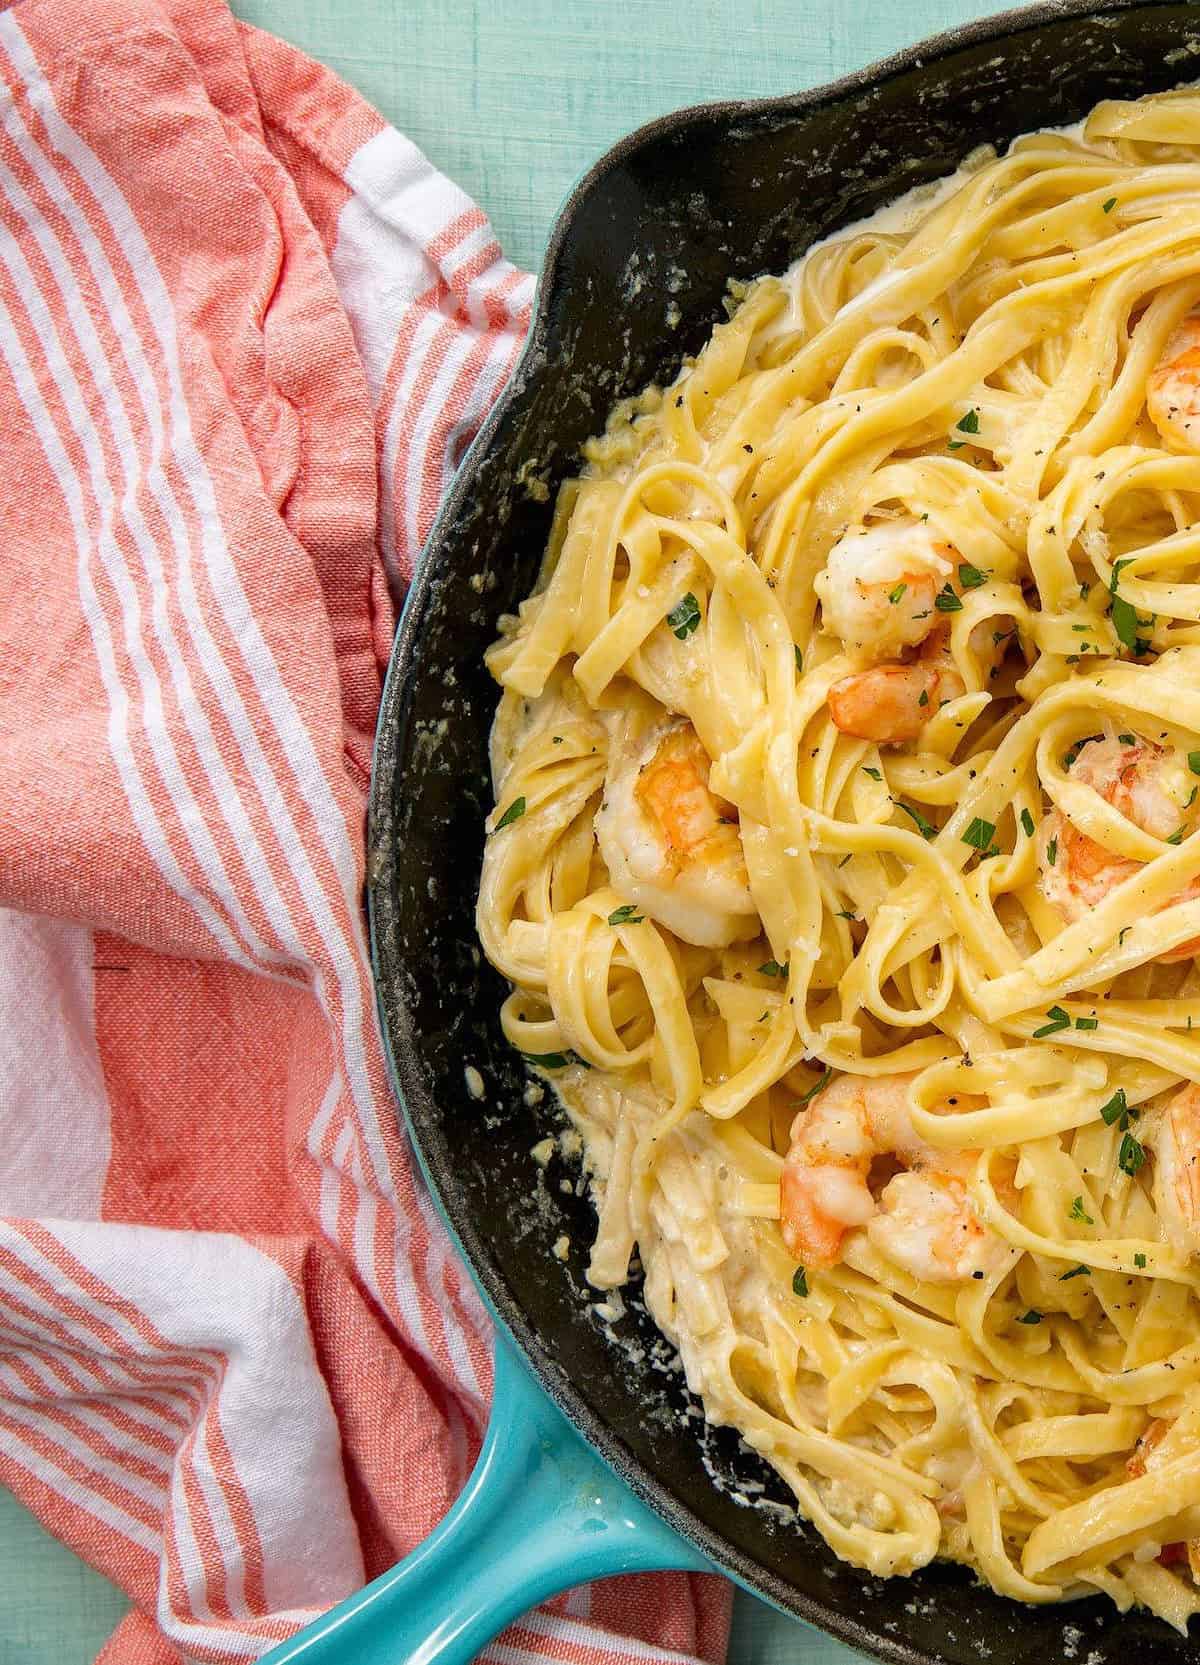  A classic Italian dish with a seaside twist thanks to succulent shrimp.